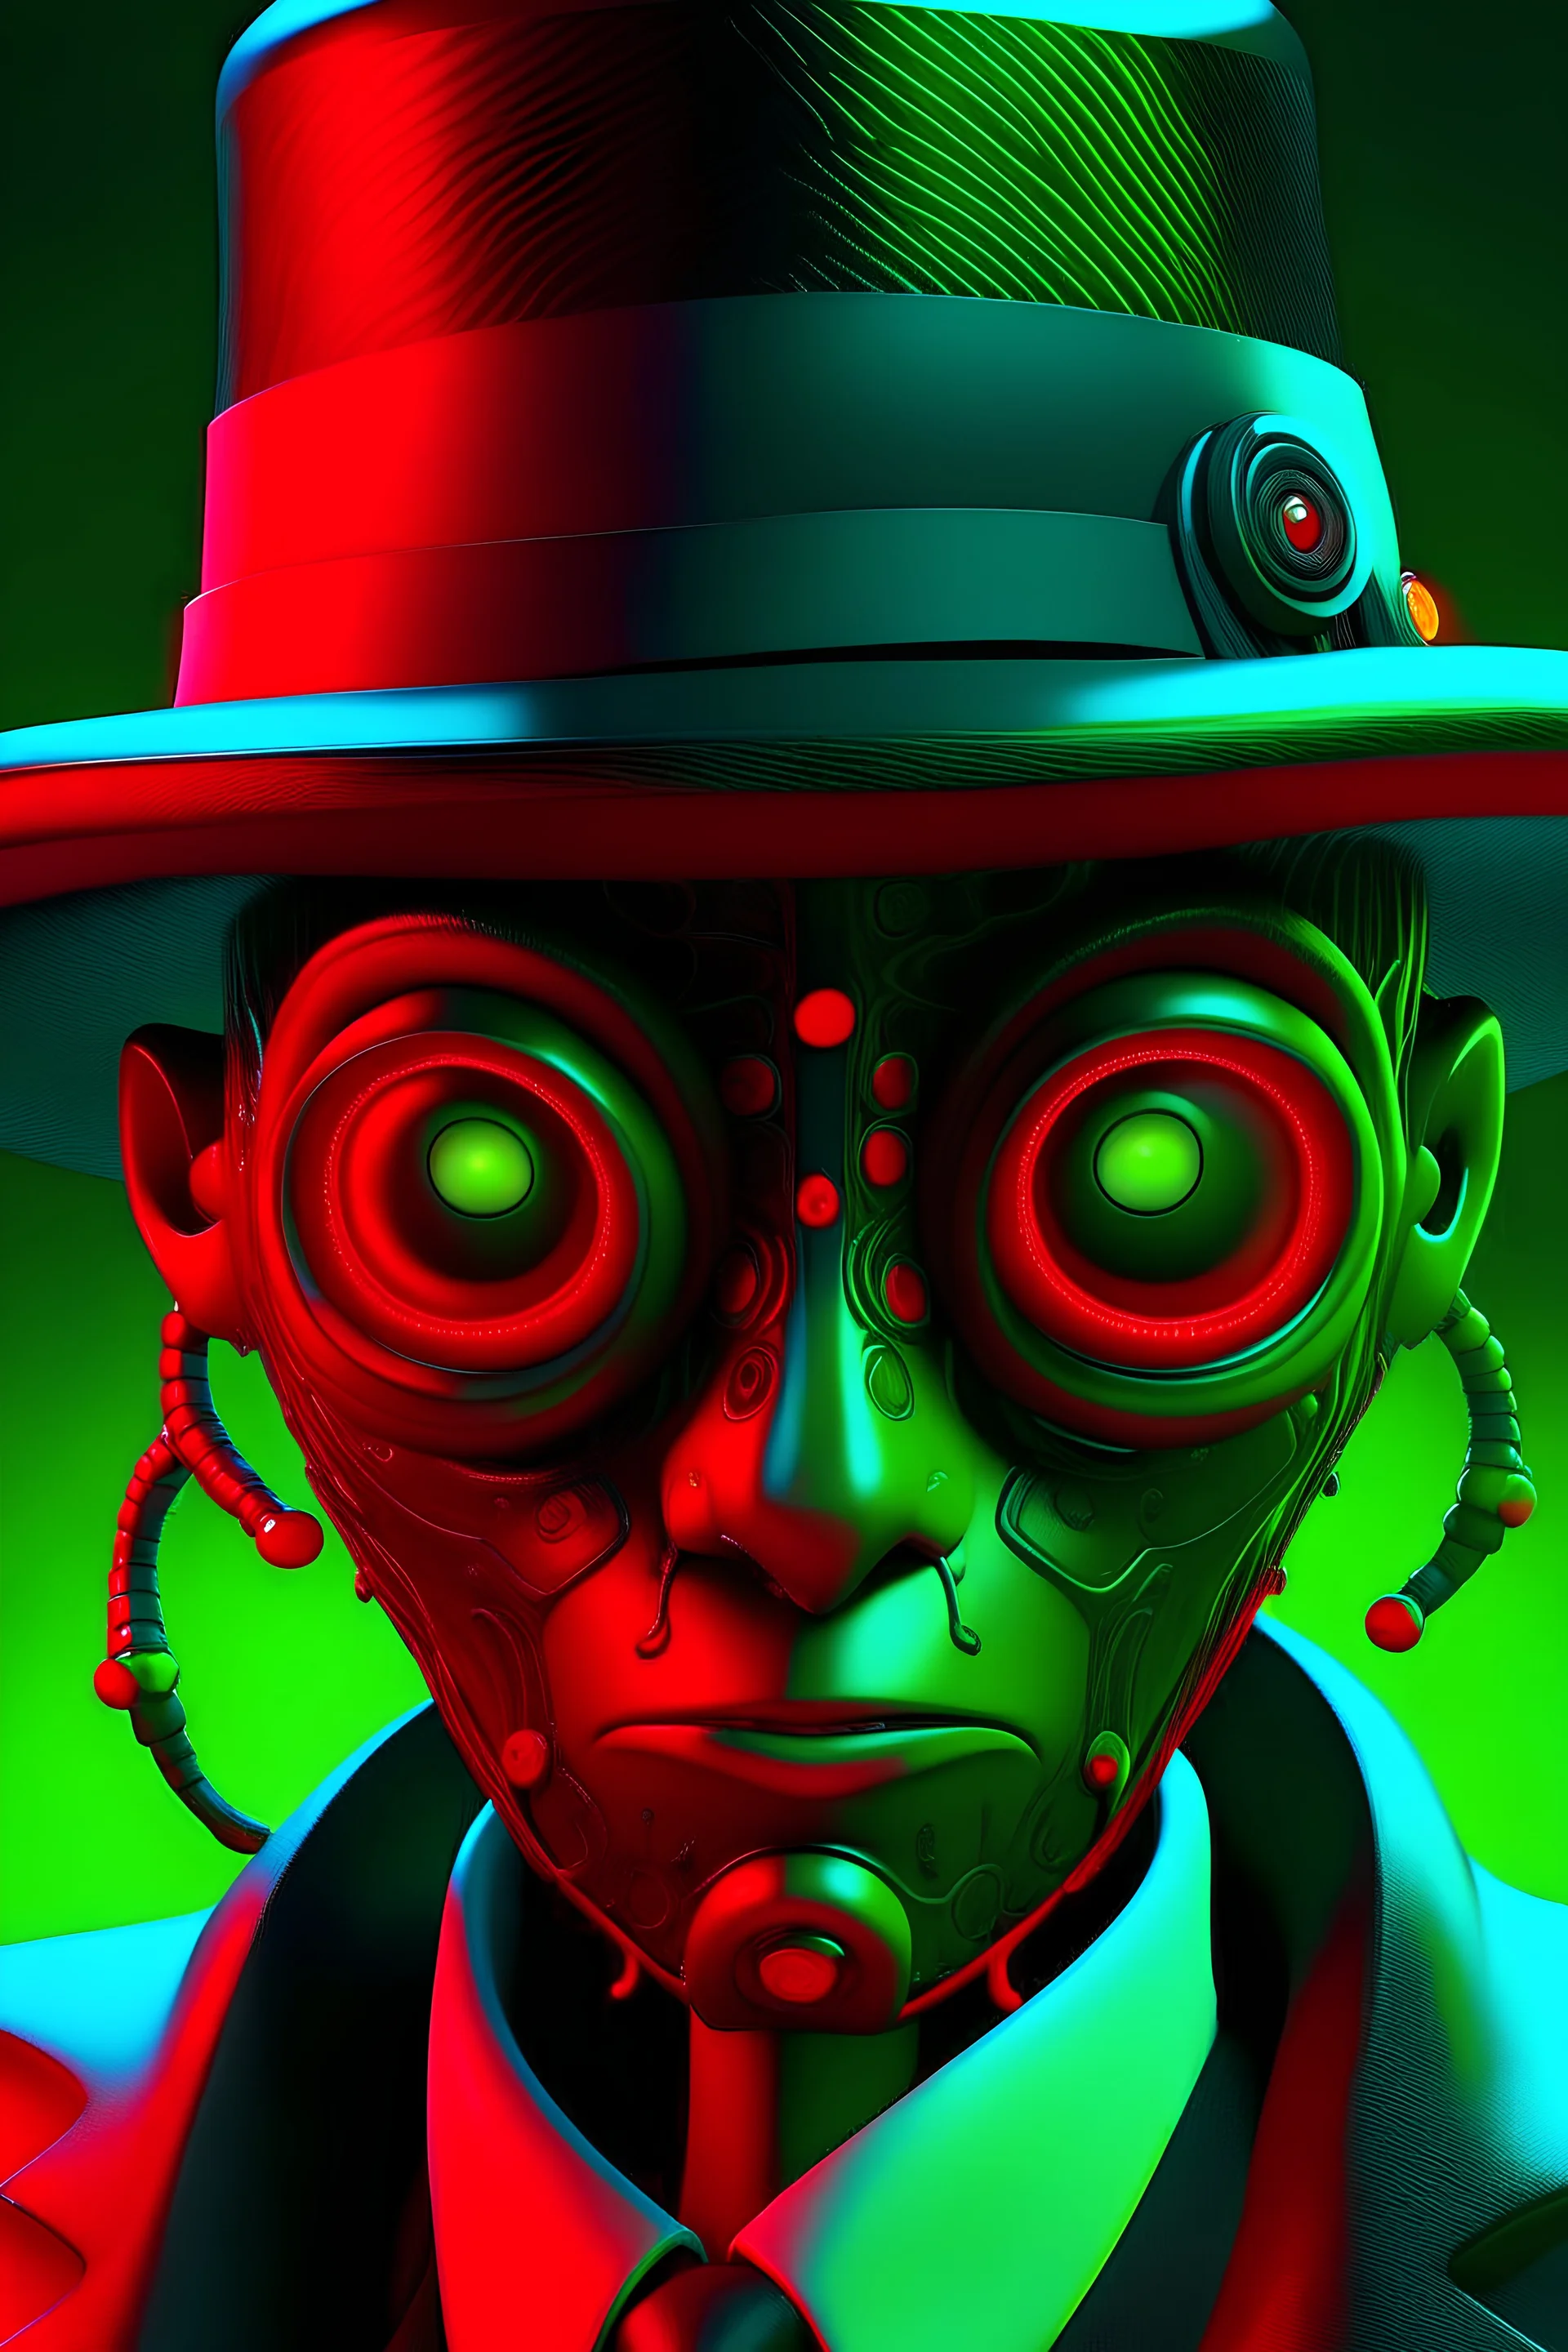 black cyborg with fluorescent green tentacles, fluracent blue eyes with a staring look, wearing a red fedora hat